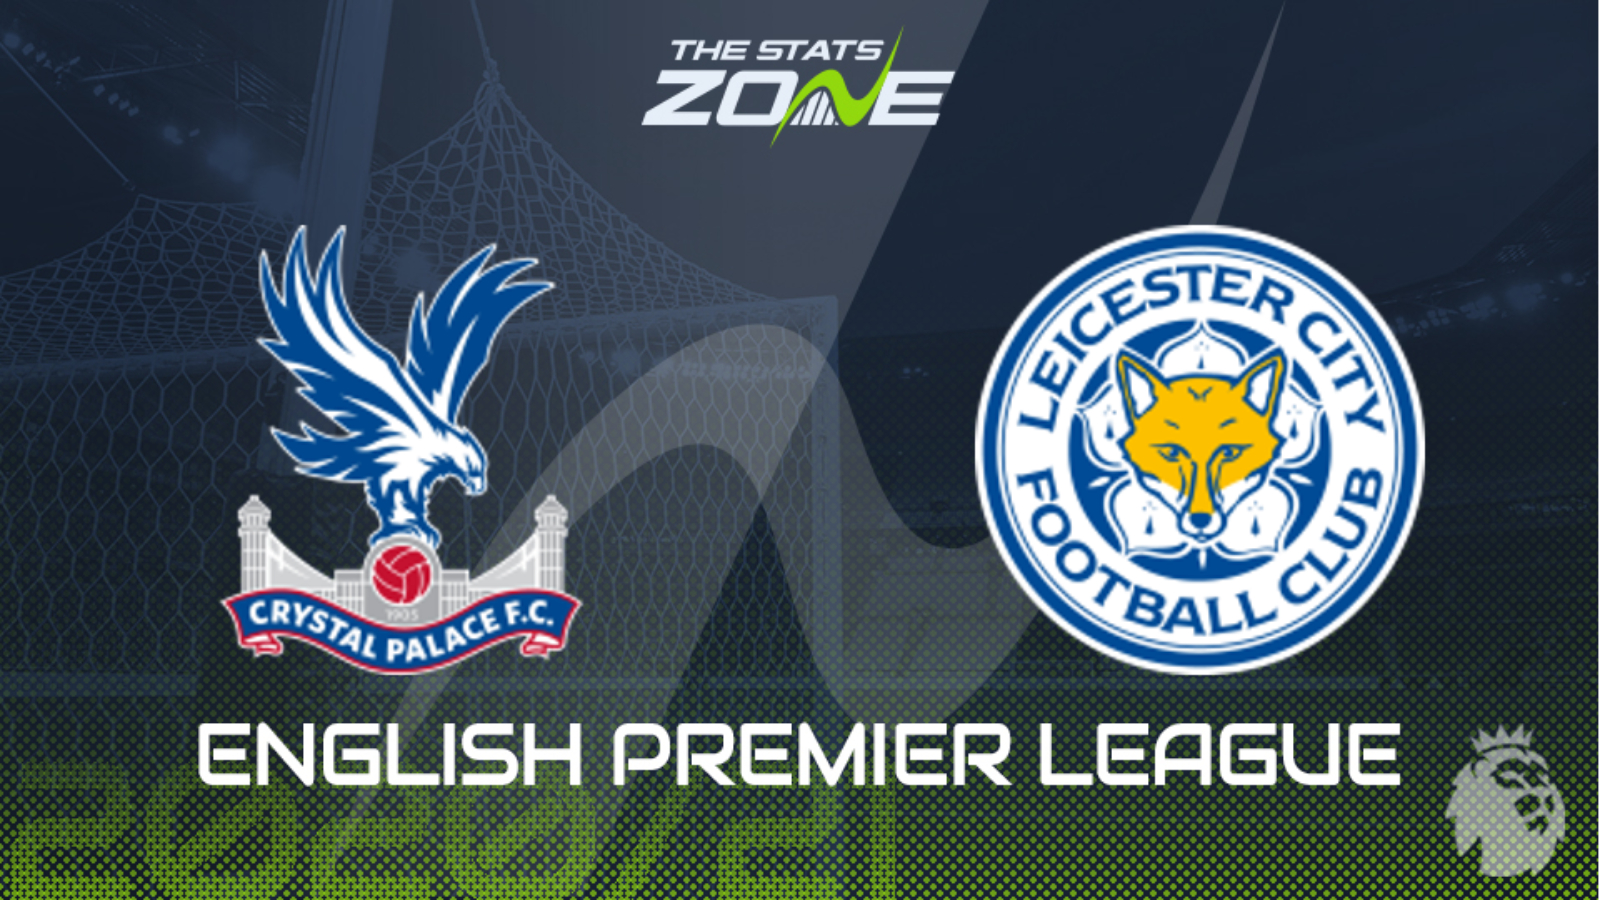 Crystal palace vs leicester city